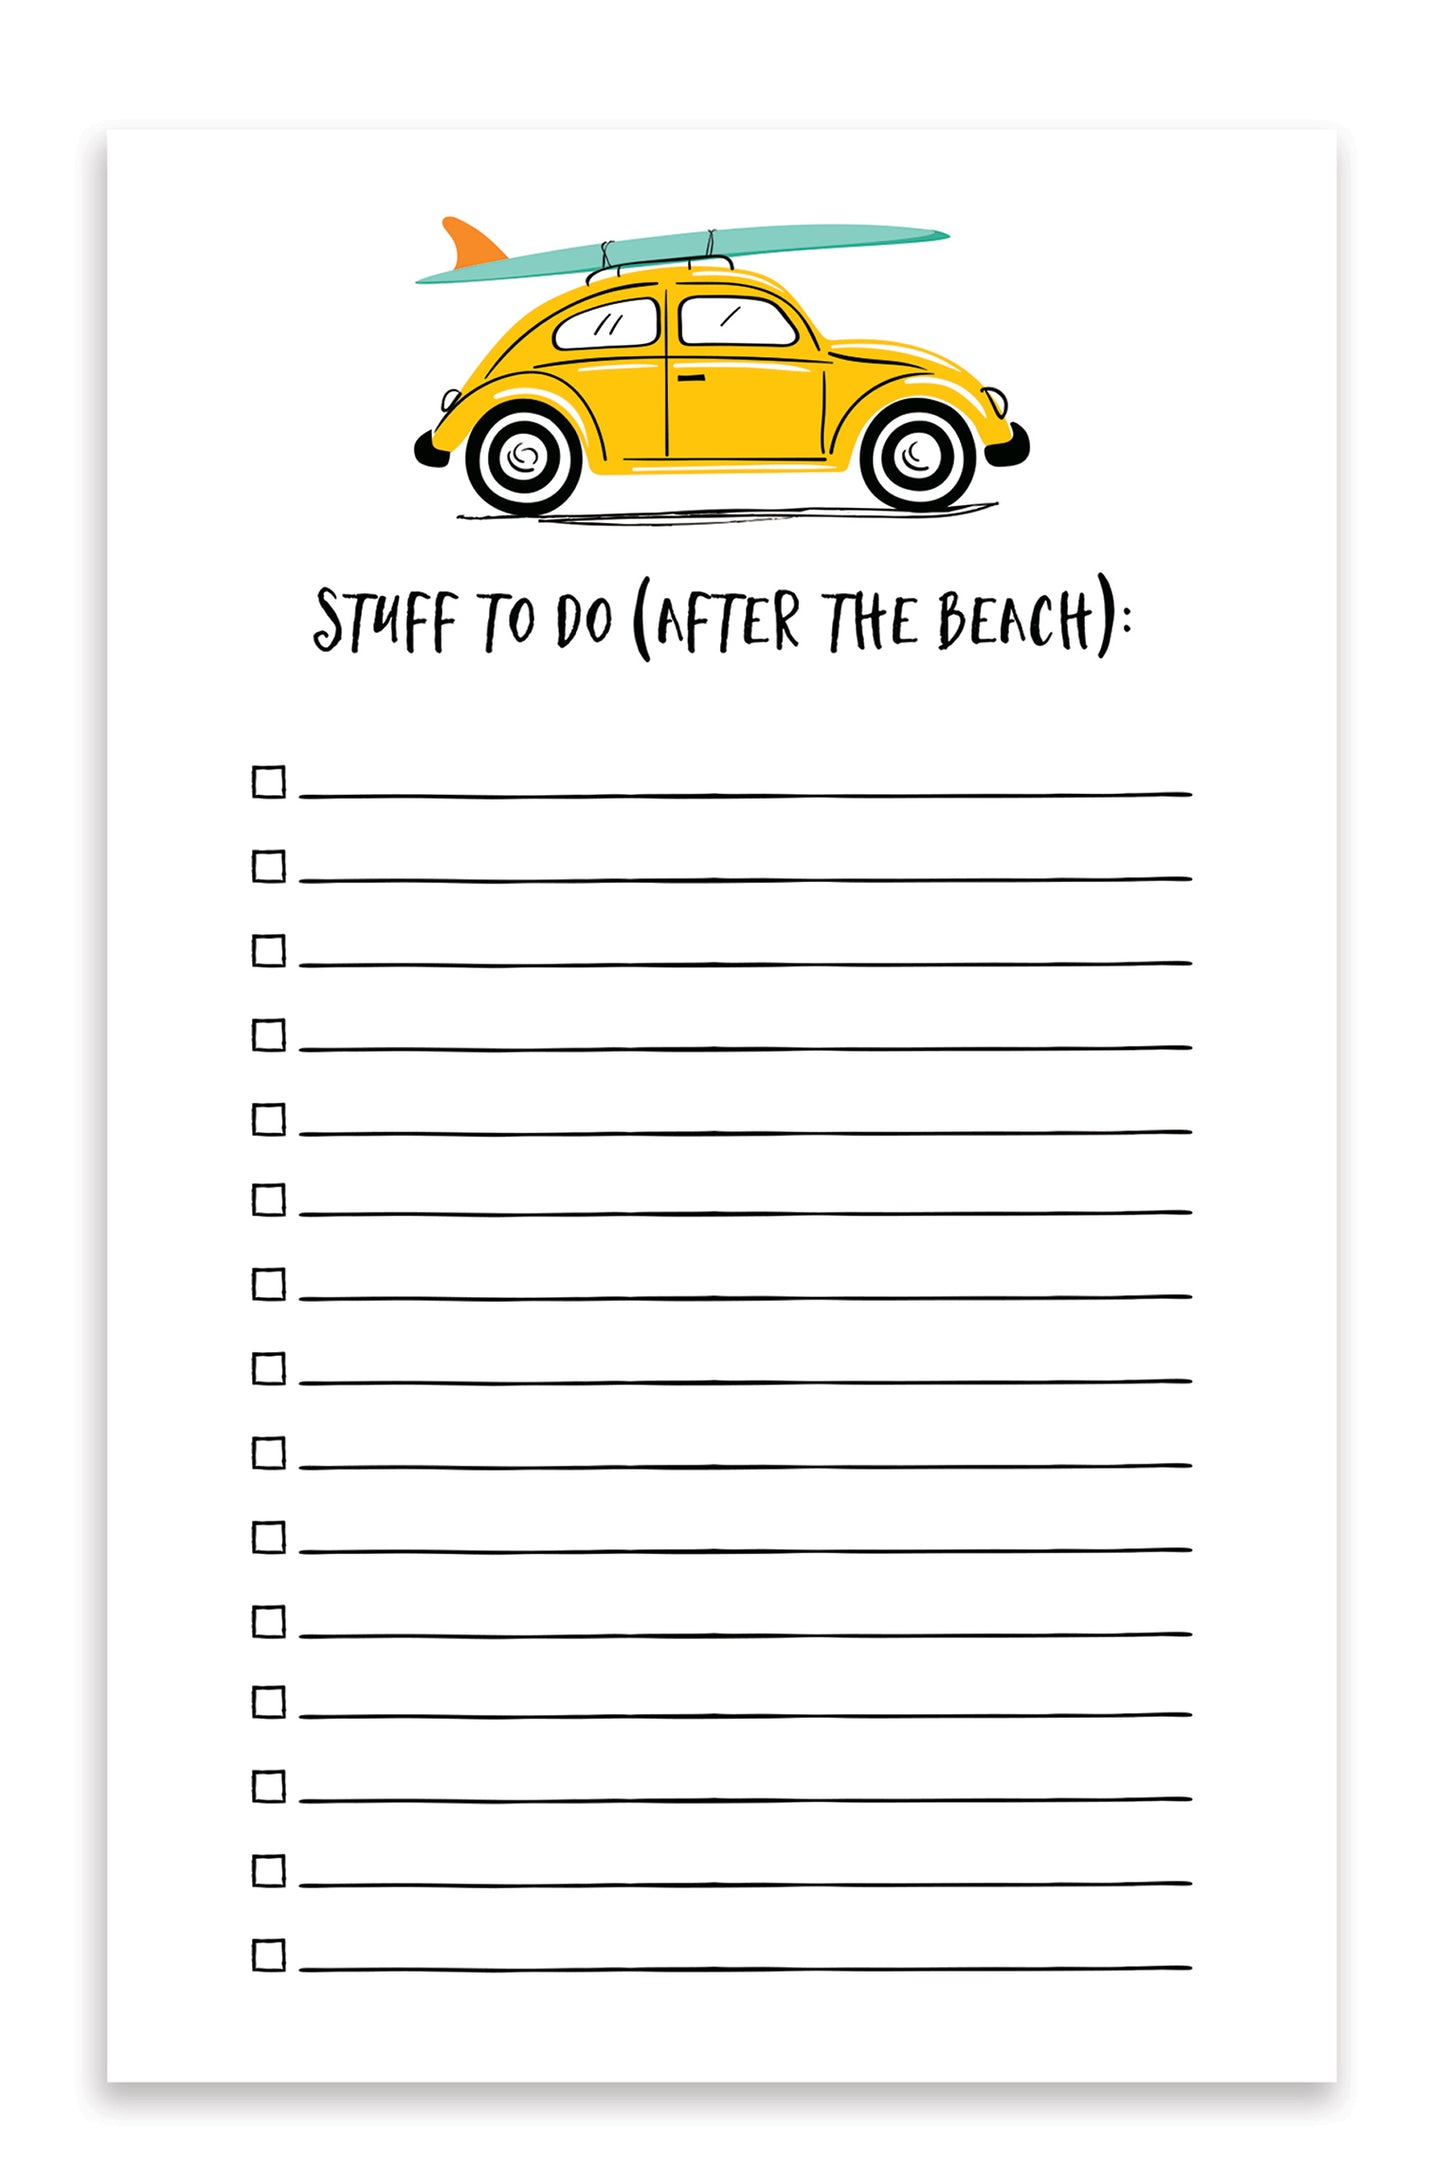 STUFF TO DO (AFTER THE BEACH) - surf notepad